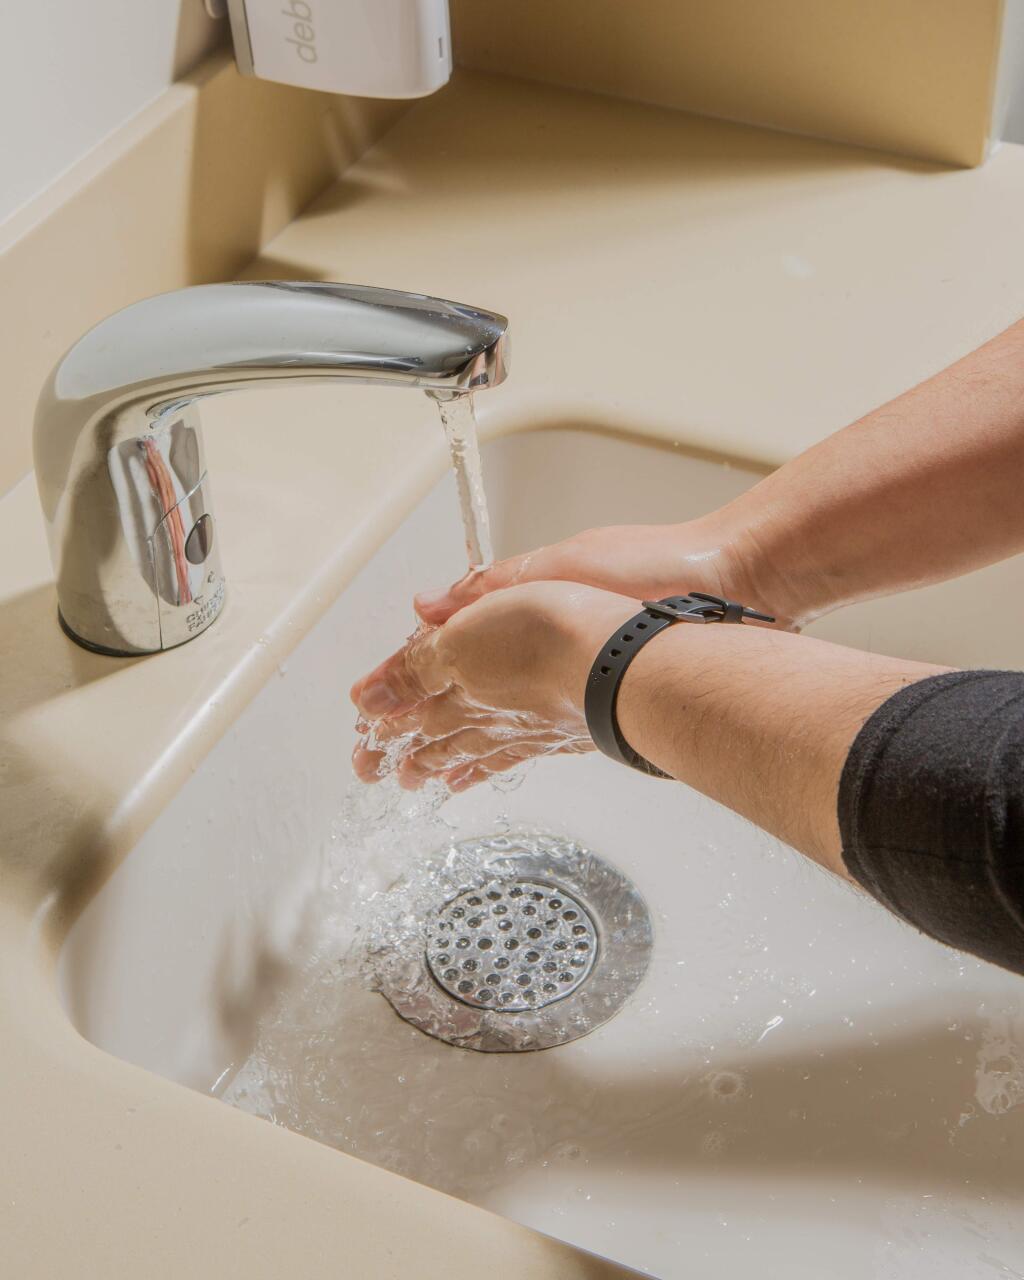 School officials want parents to make sure their children know how to wash their hands properly before returning to school. Washing hands with soap for at least 20 seconds is recommended. (Alex Welsh/The New York Times)